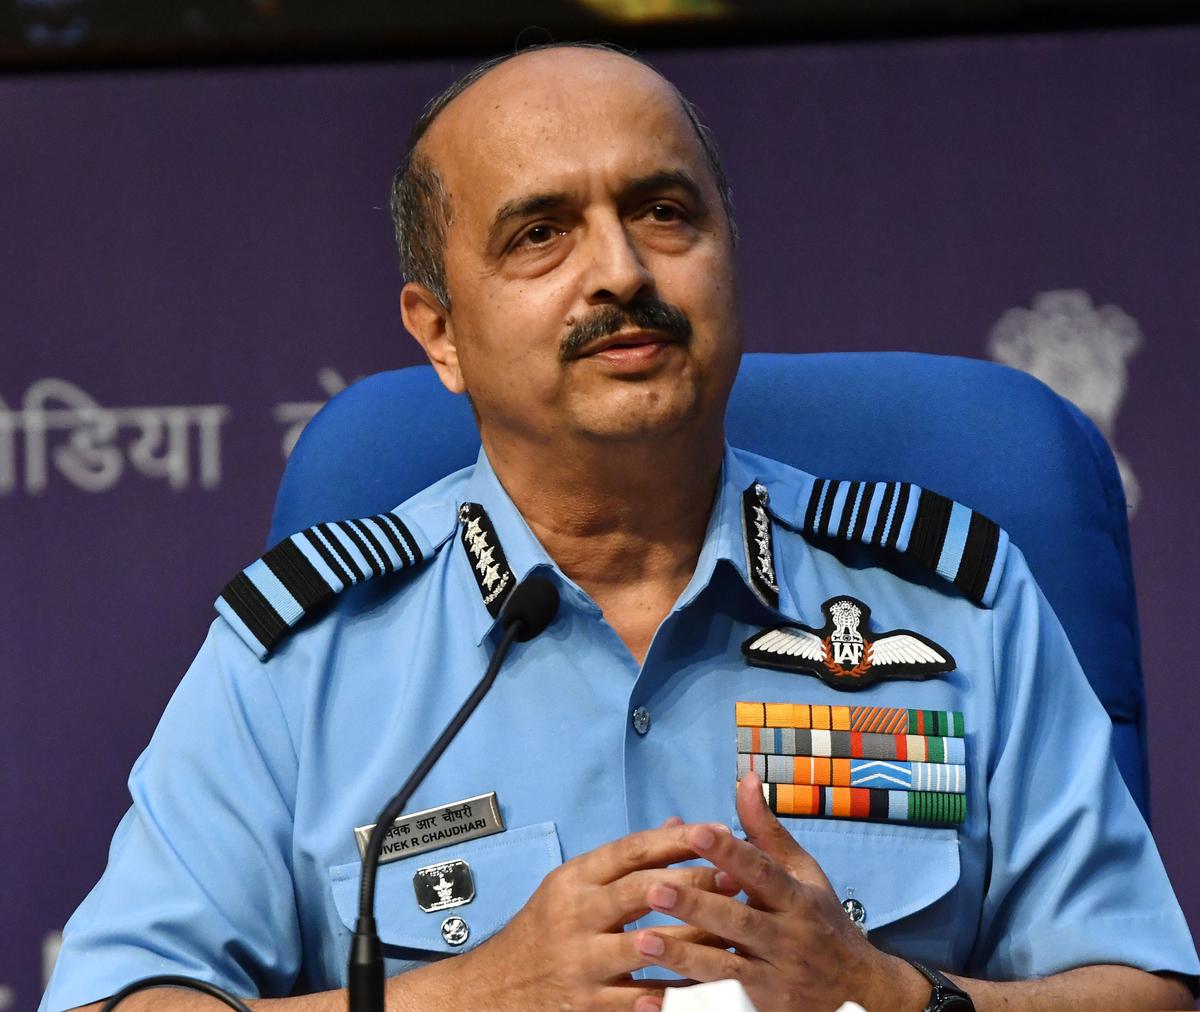 Indian aerospace ecosystem seeing unprecedented growth towards becoming self-reliant, says IAF Chief